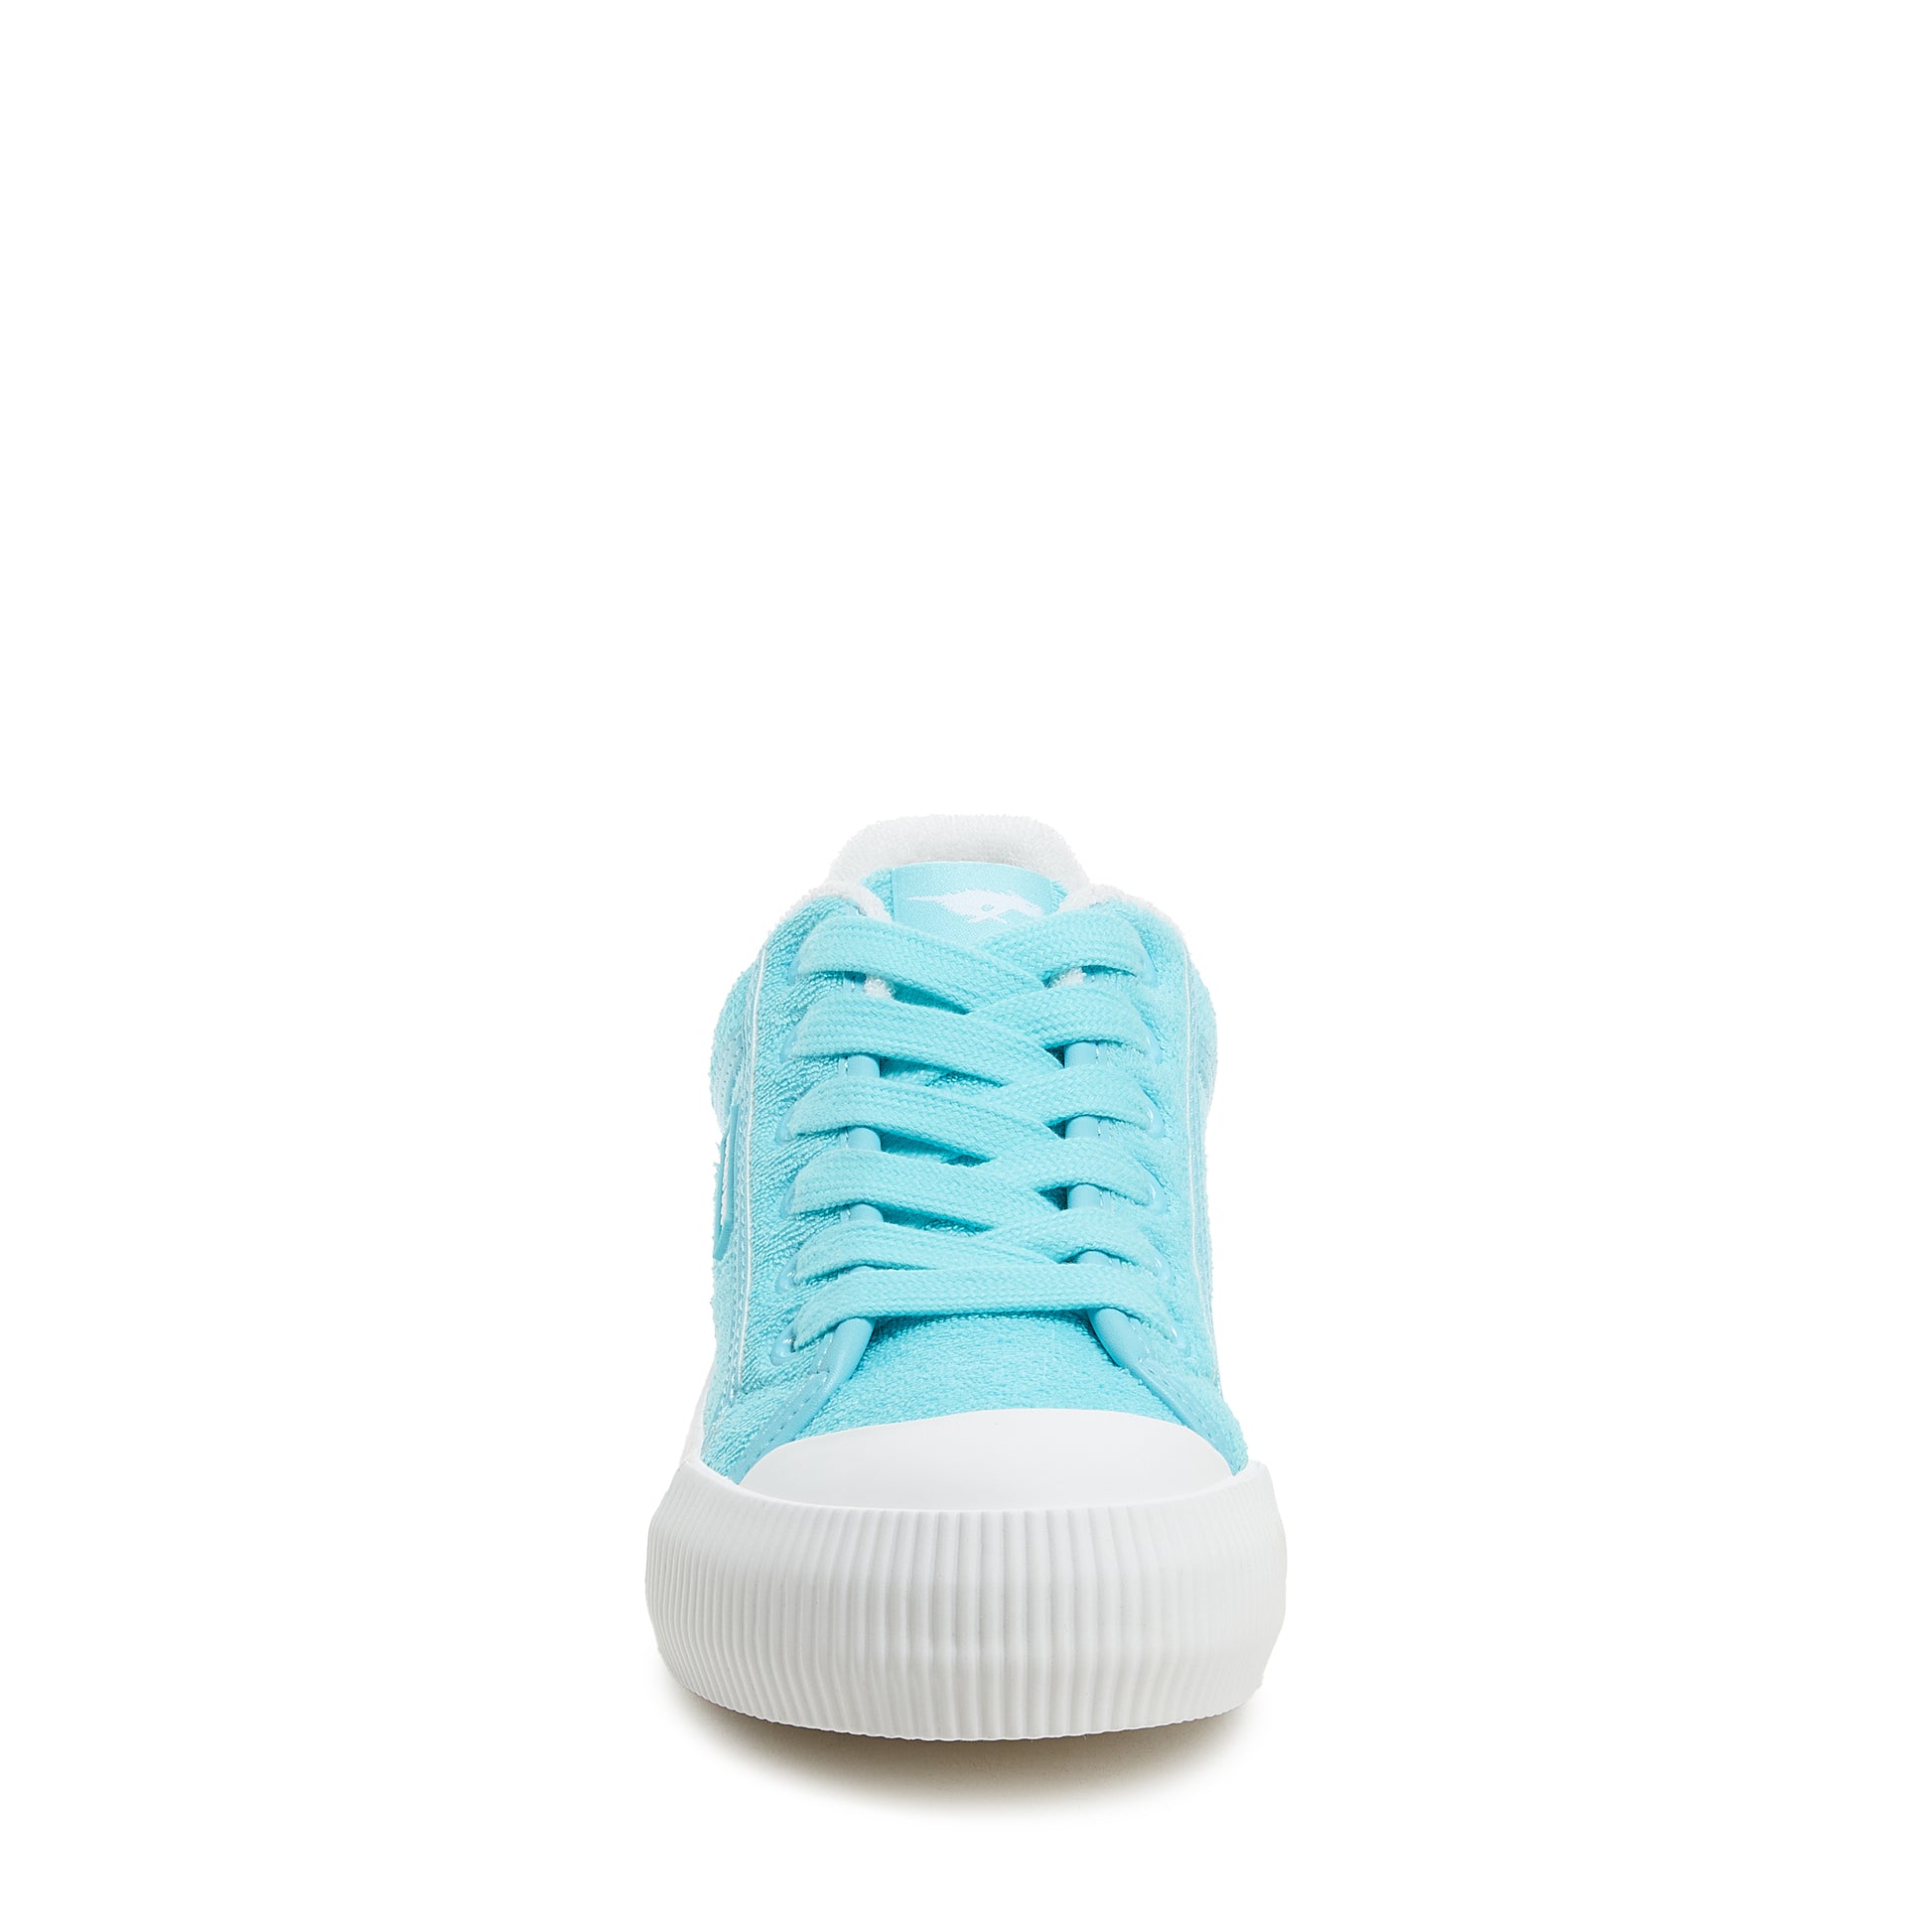 Rocket Dog® Cheery Turquoise Terry Sneakers - Breezy Lift